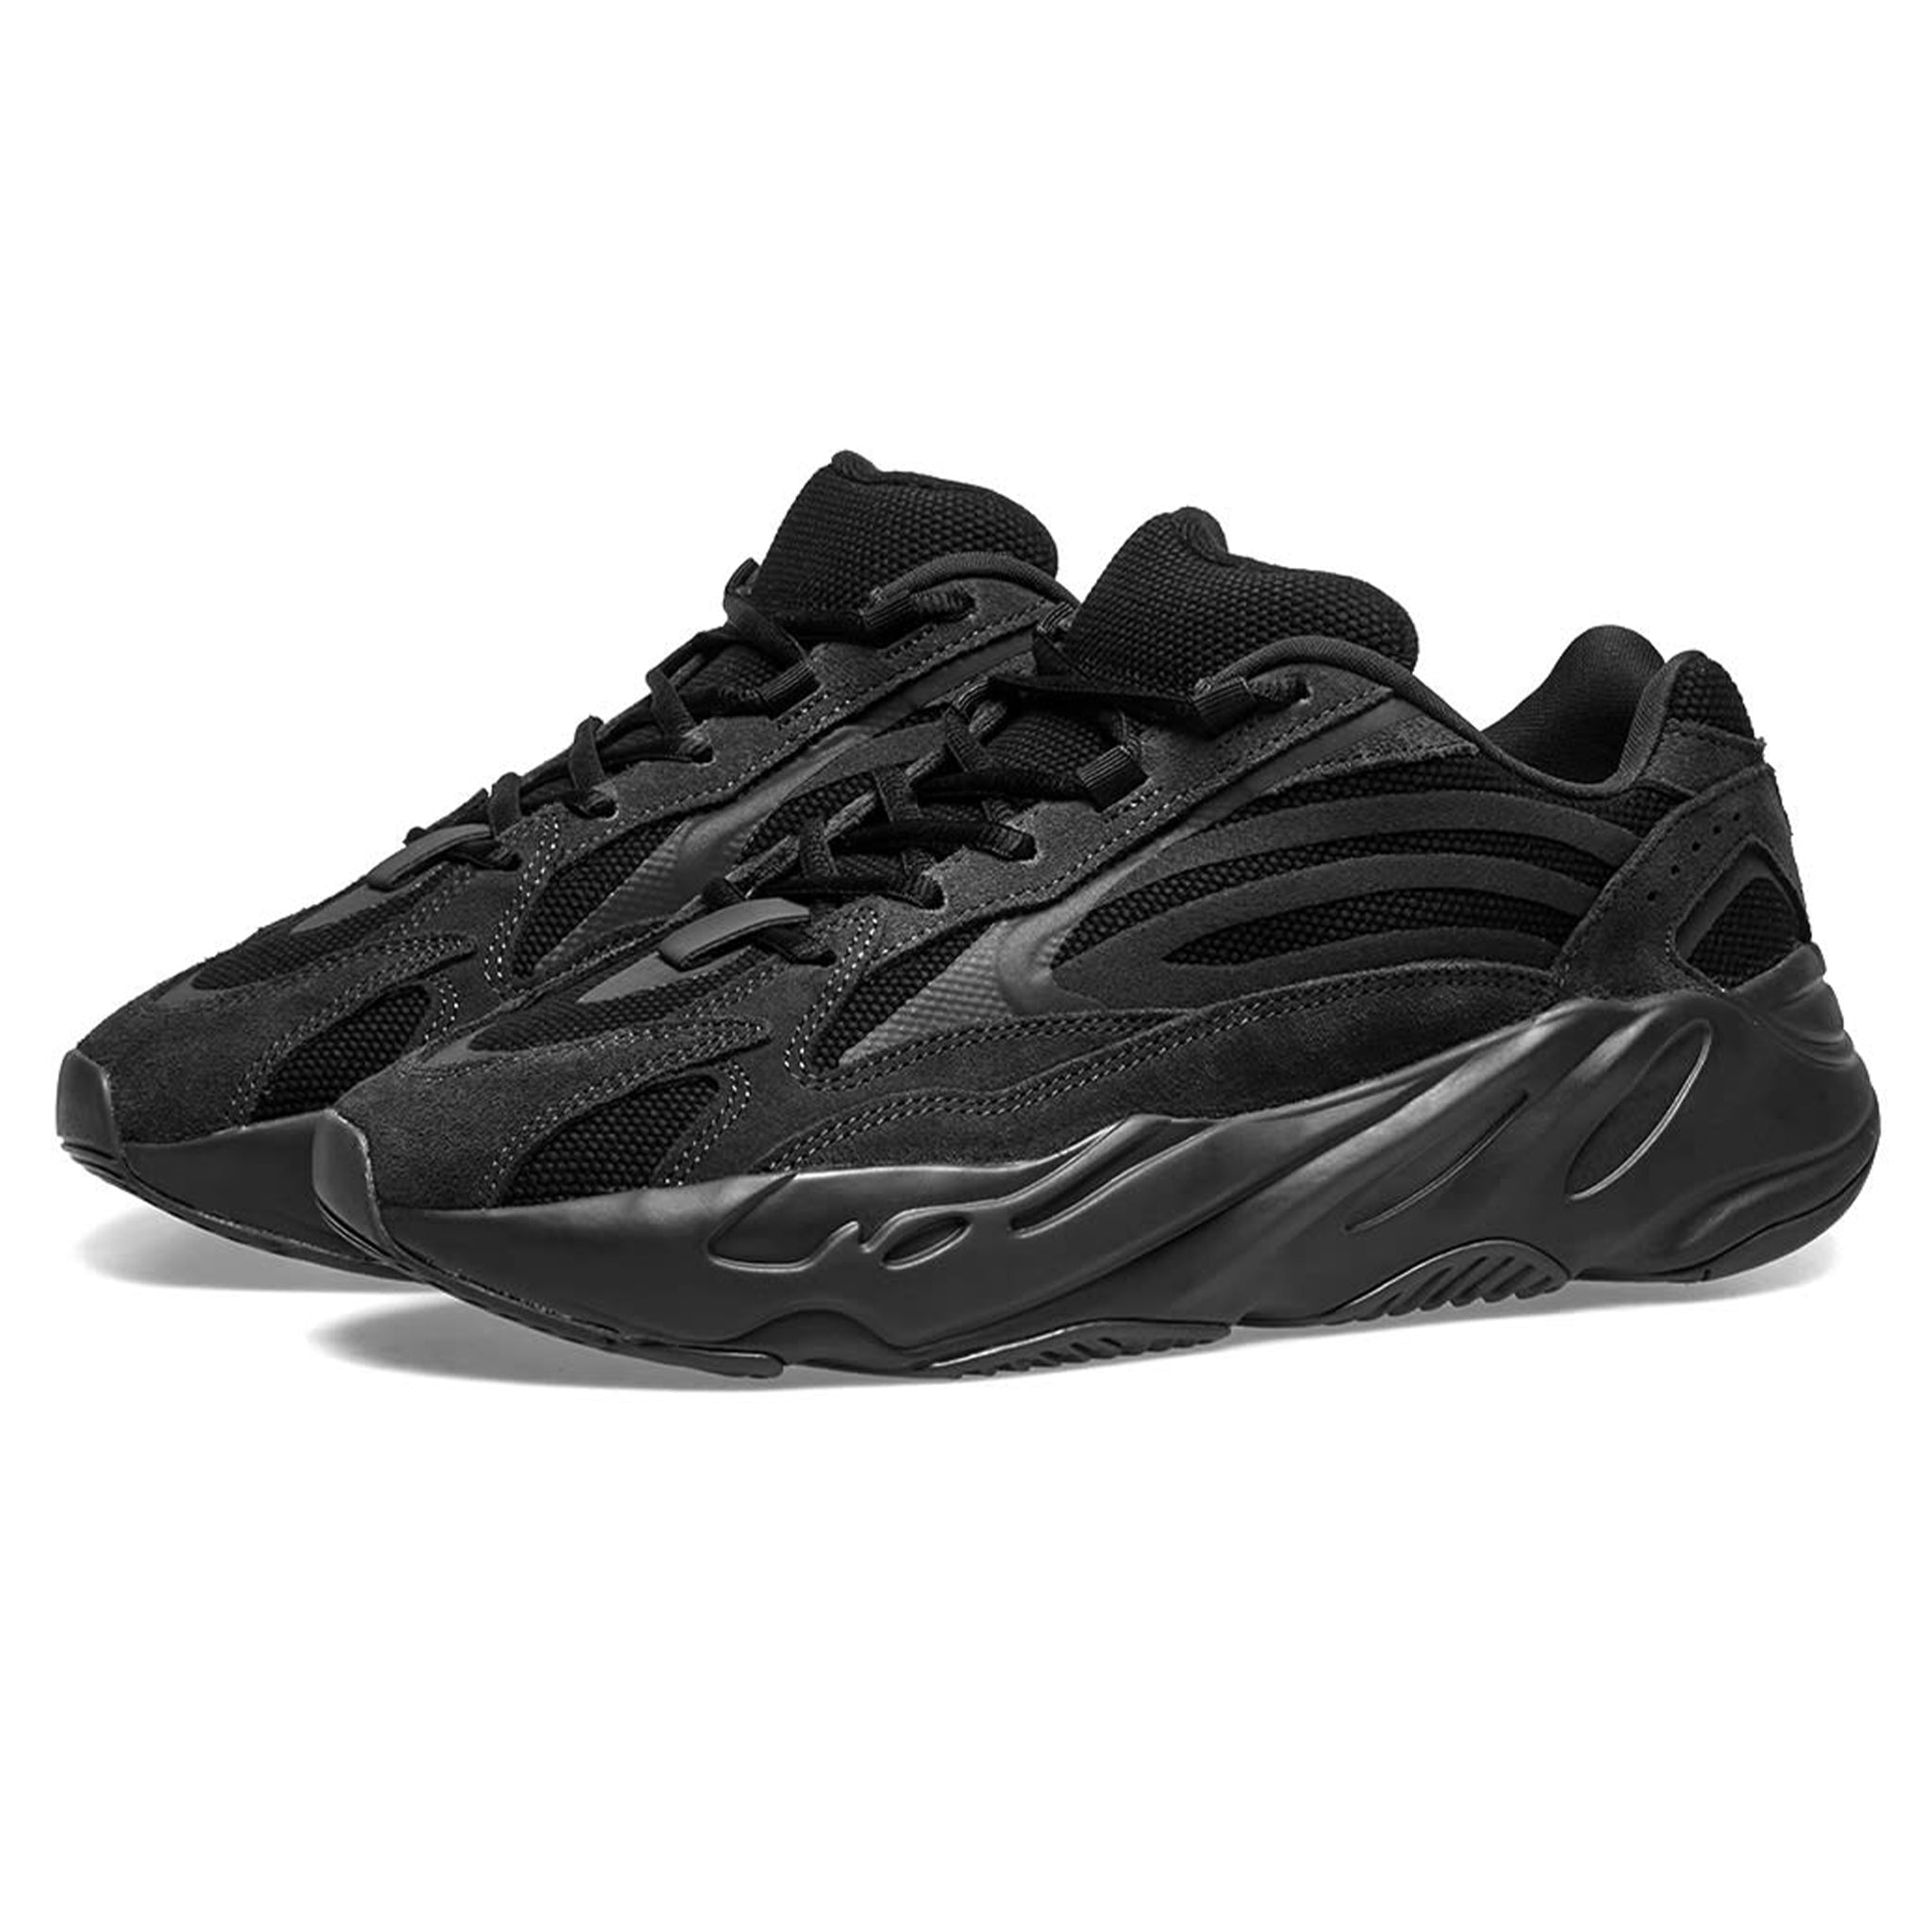 Front side view of Adidas Yeezy Boost 700 V2 Vanta FU6684